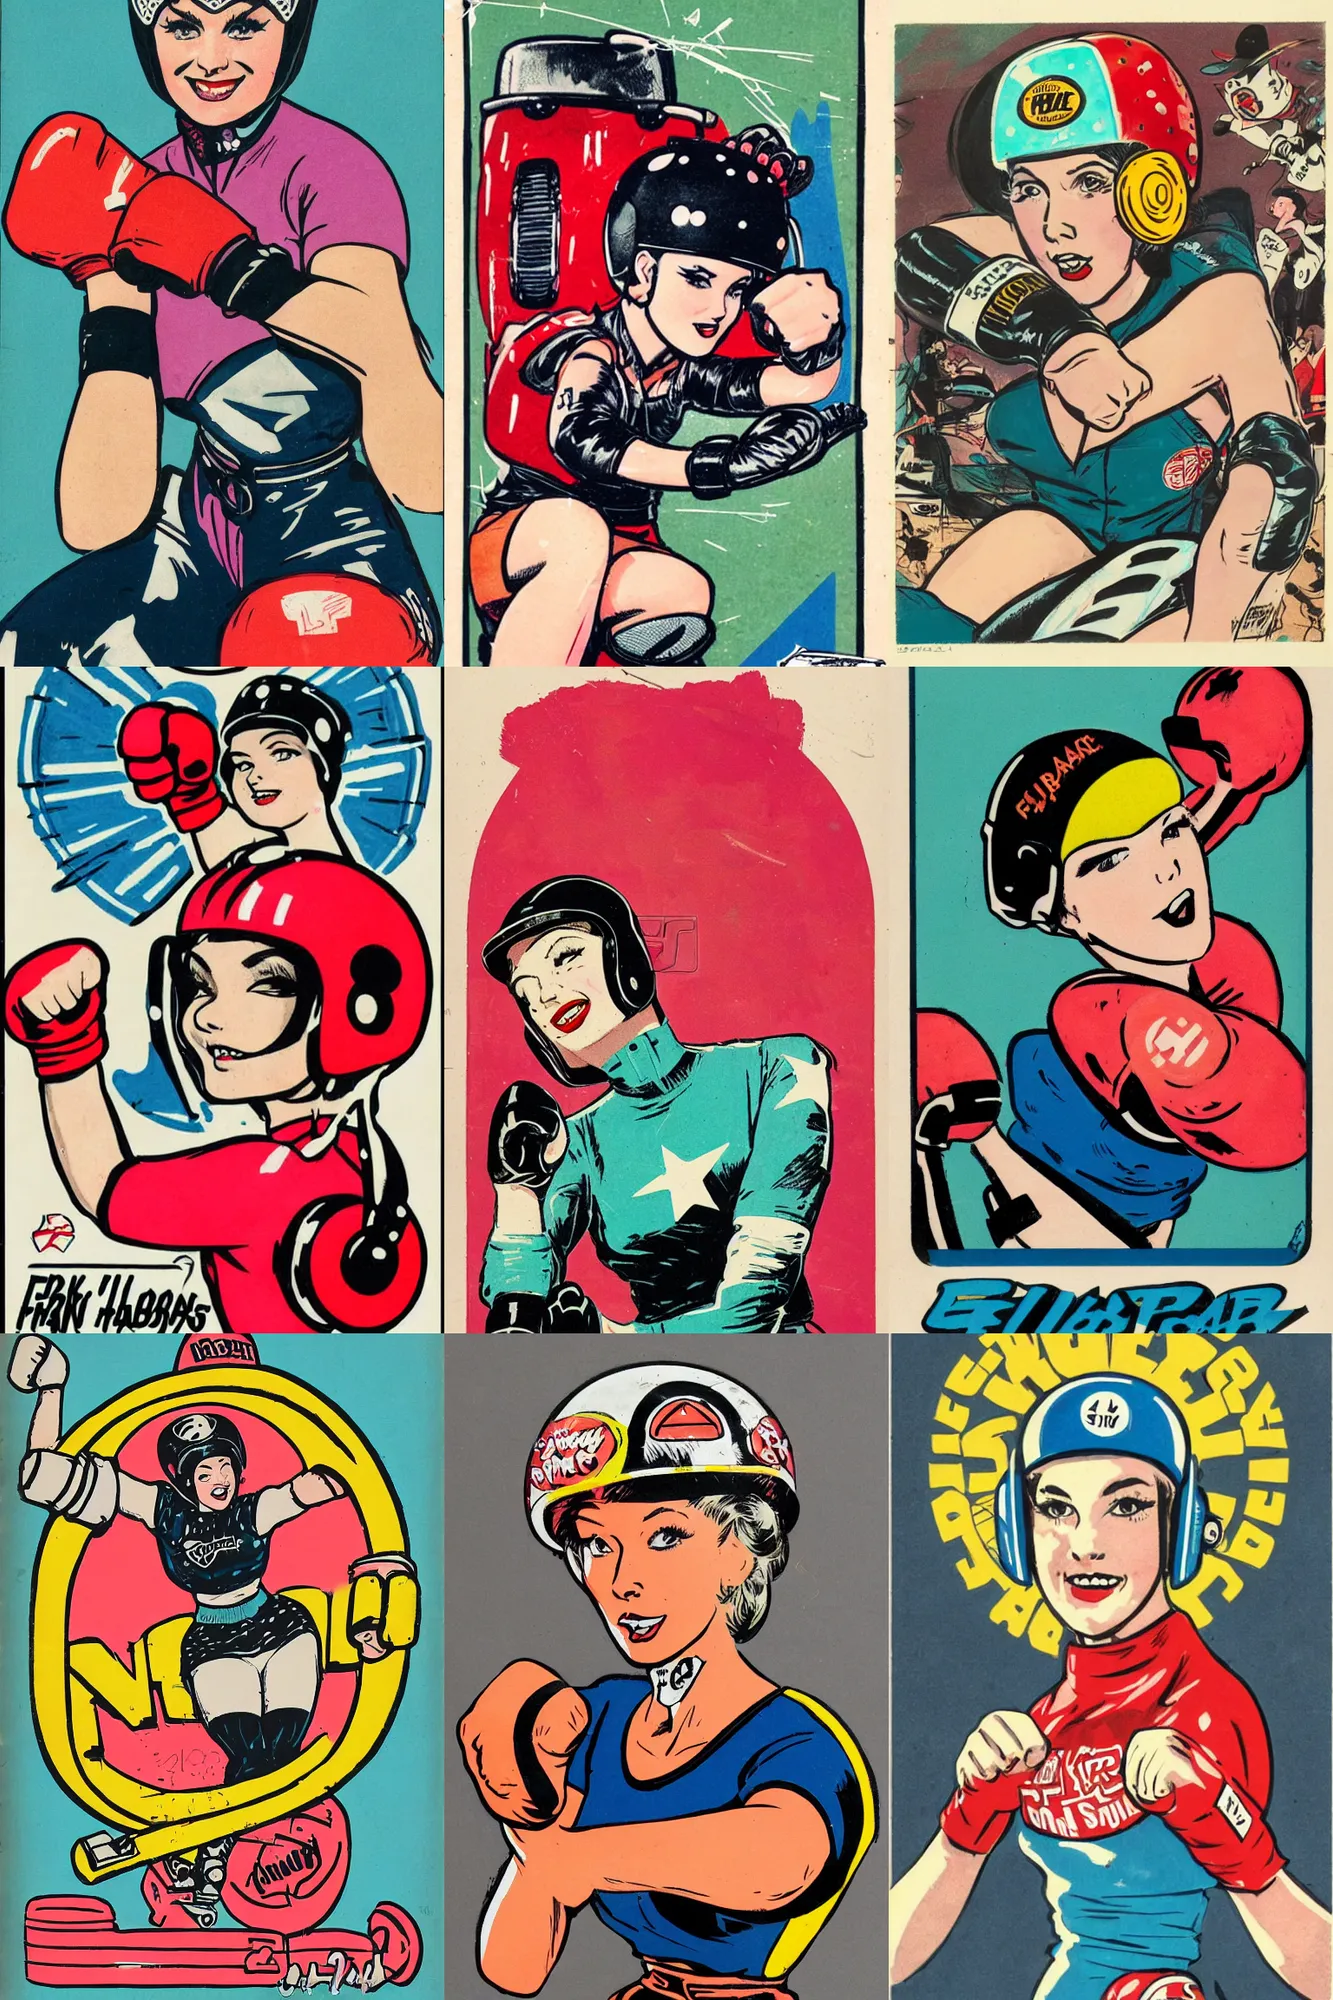 Prompt: roller derby girl portrait, logo, wearing helmet, Frank Hampson and mcbess, 1950s, smashing fists